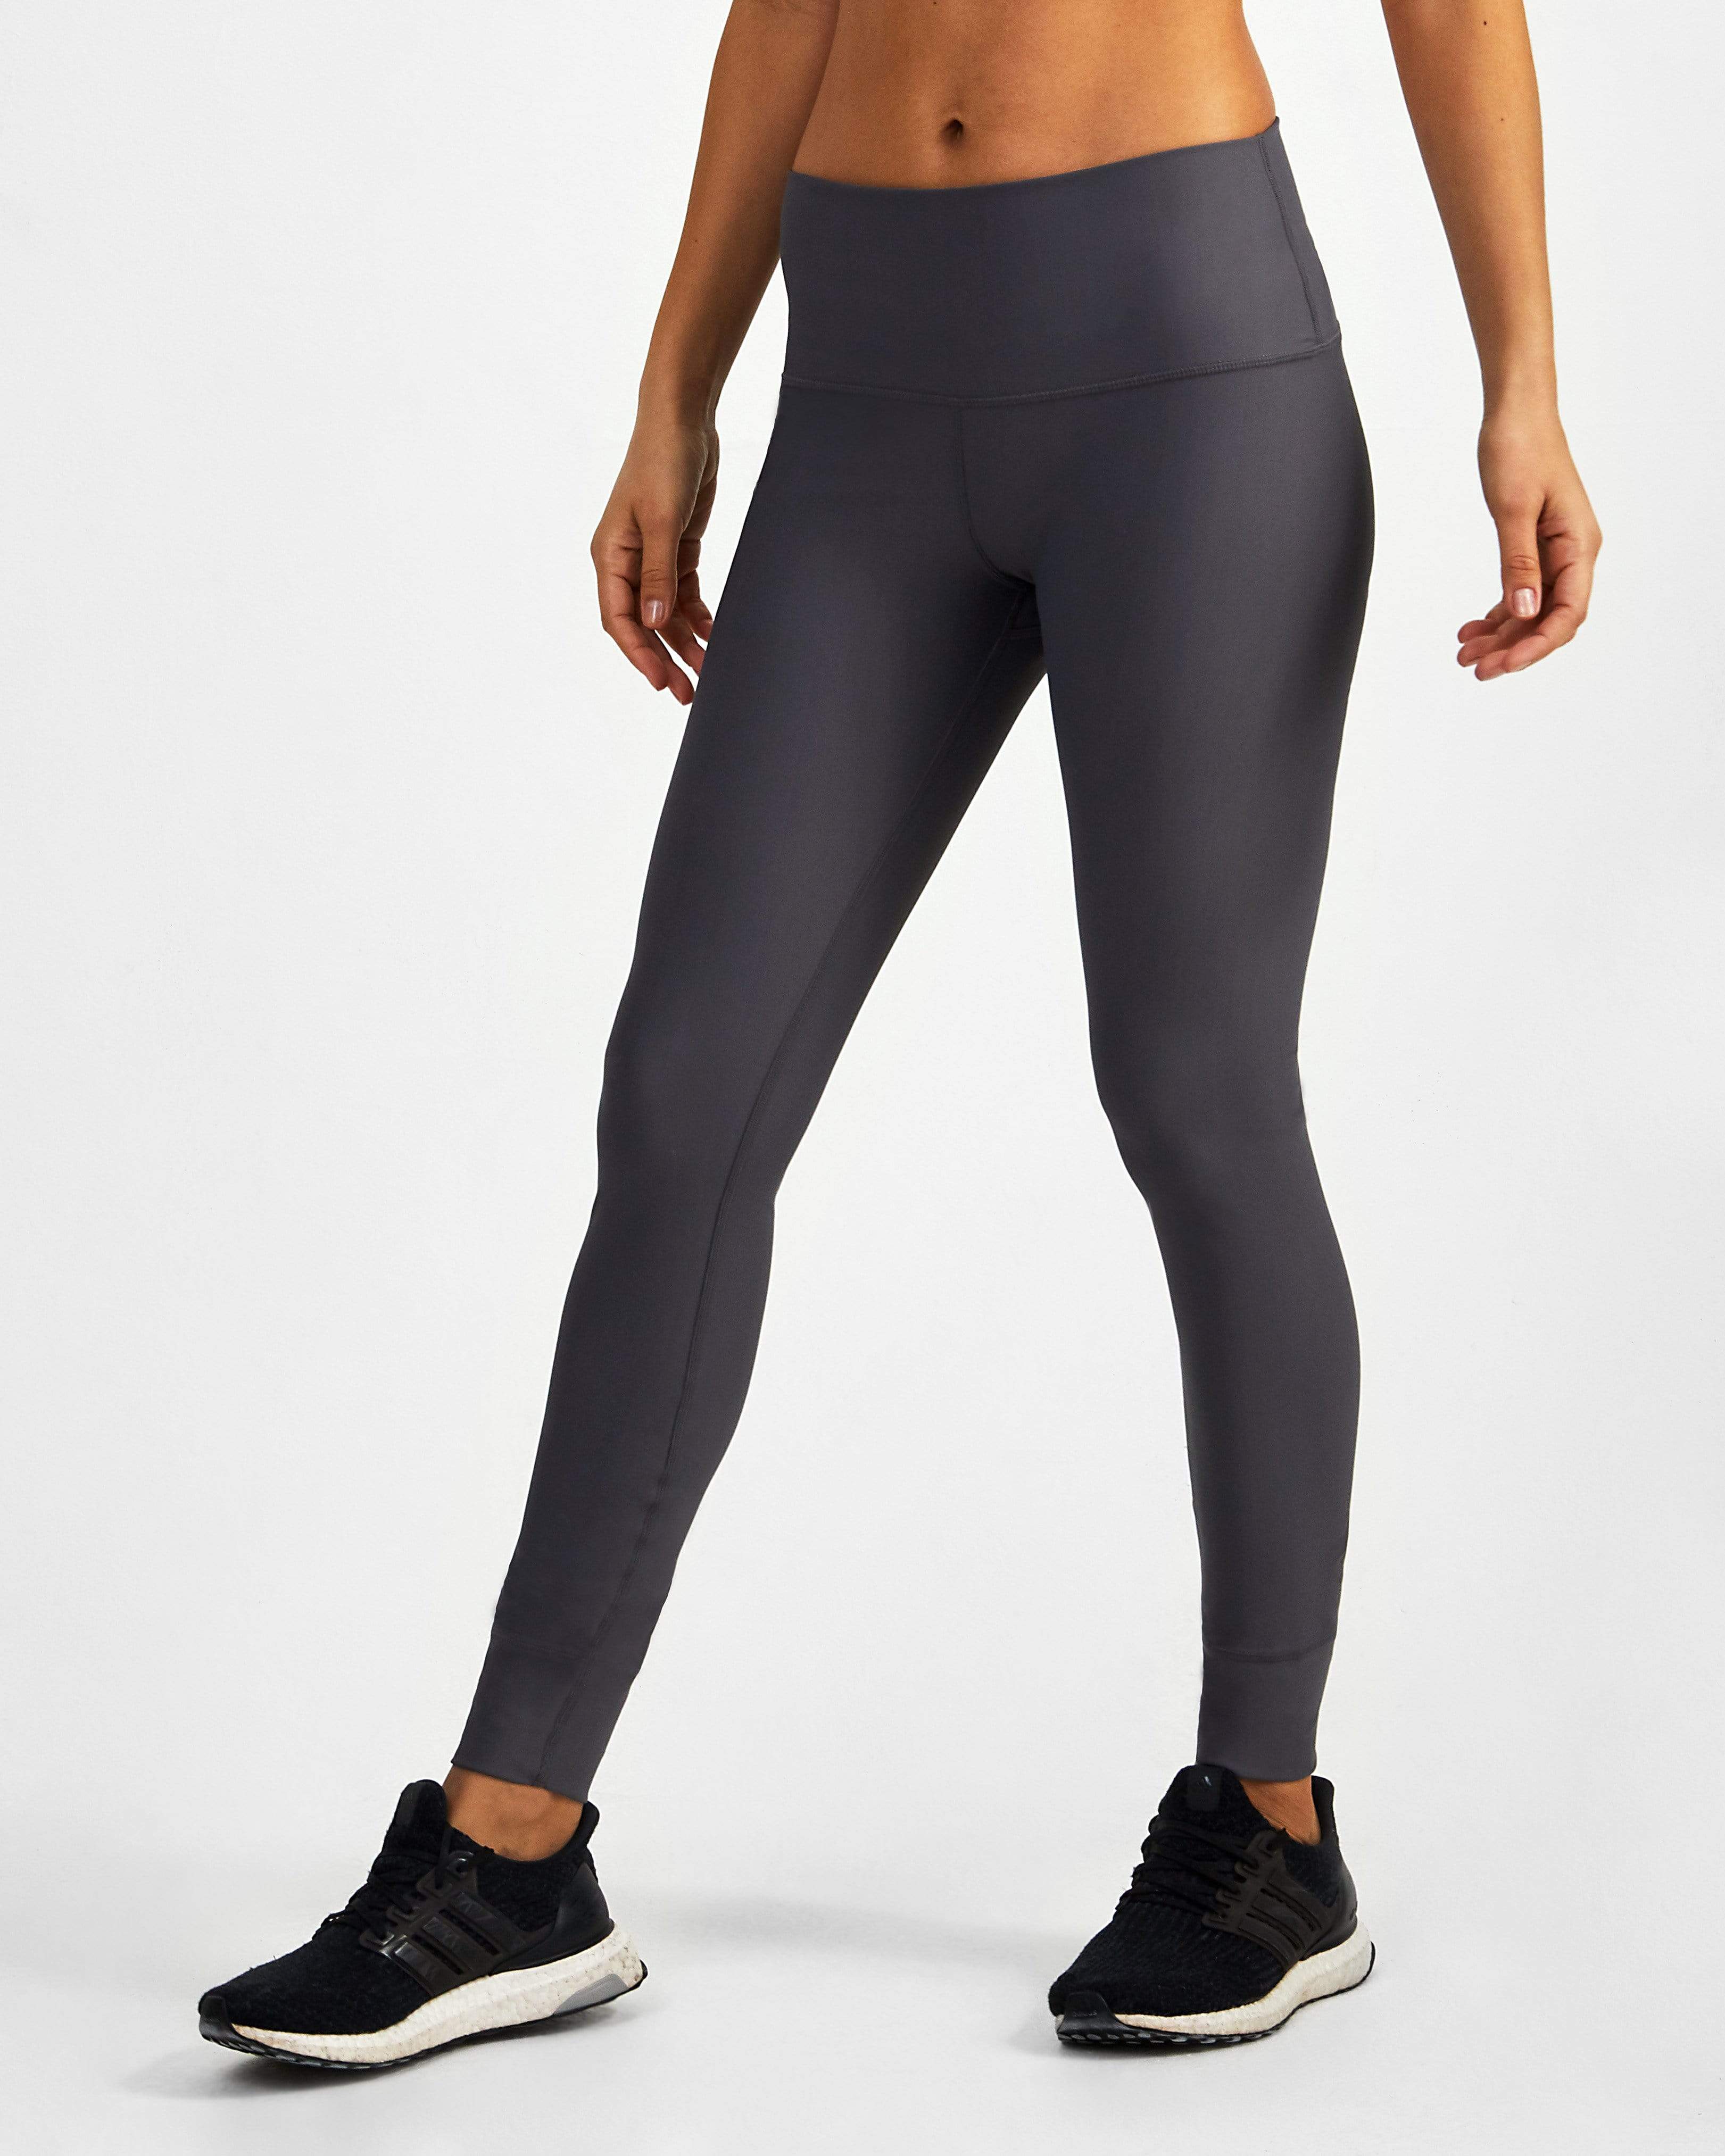 Grey Contour Seamless Leggings Best for GYM, Jogging, Workout